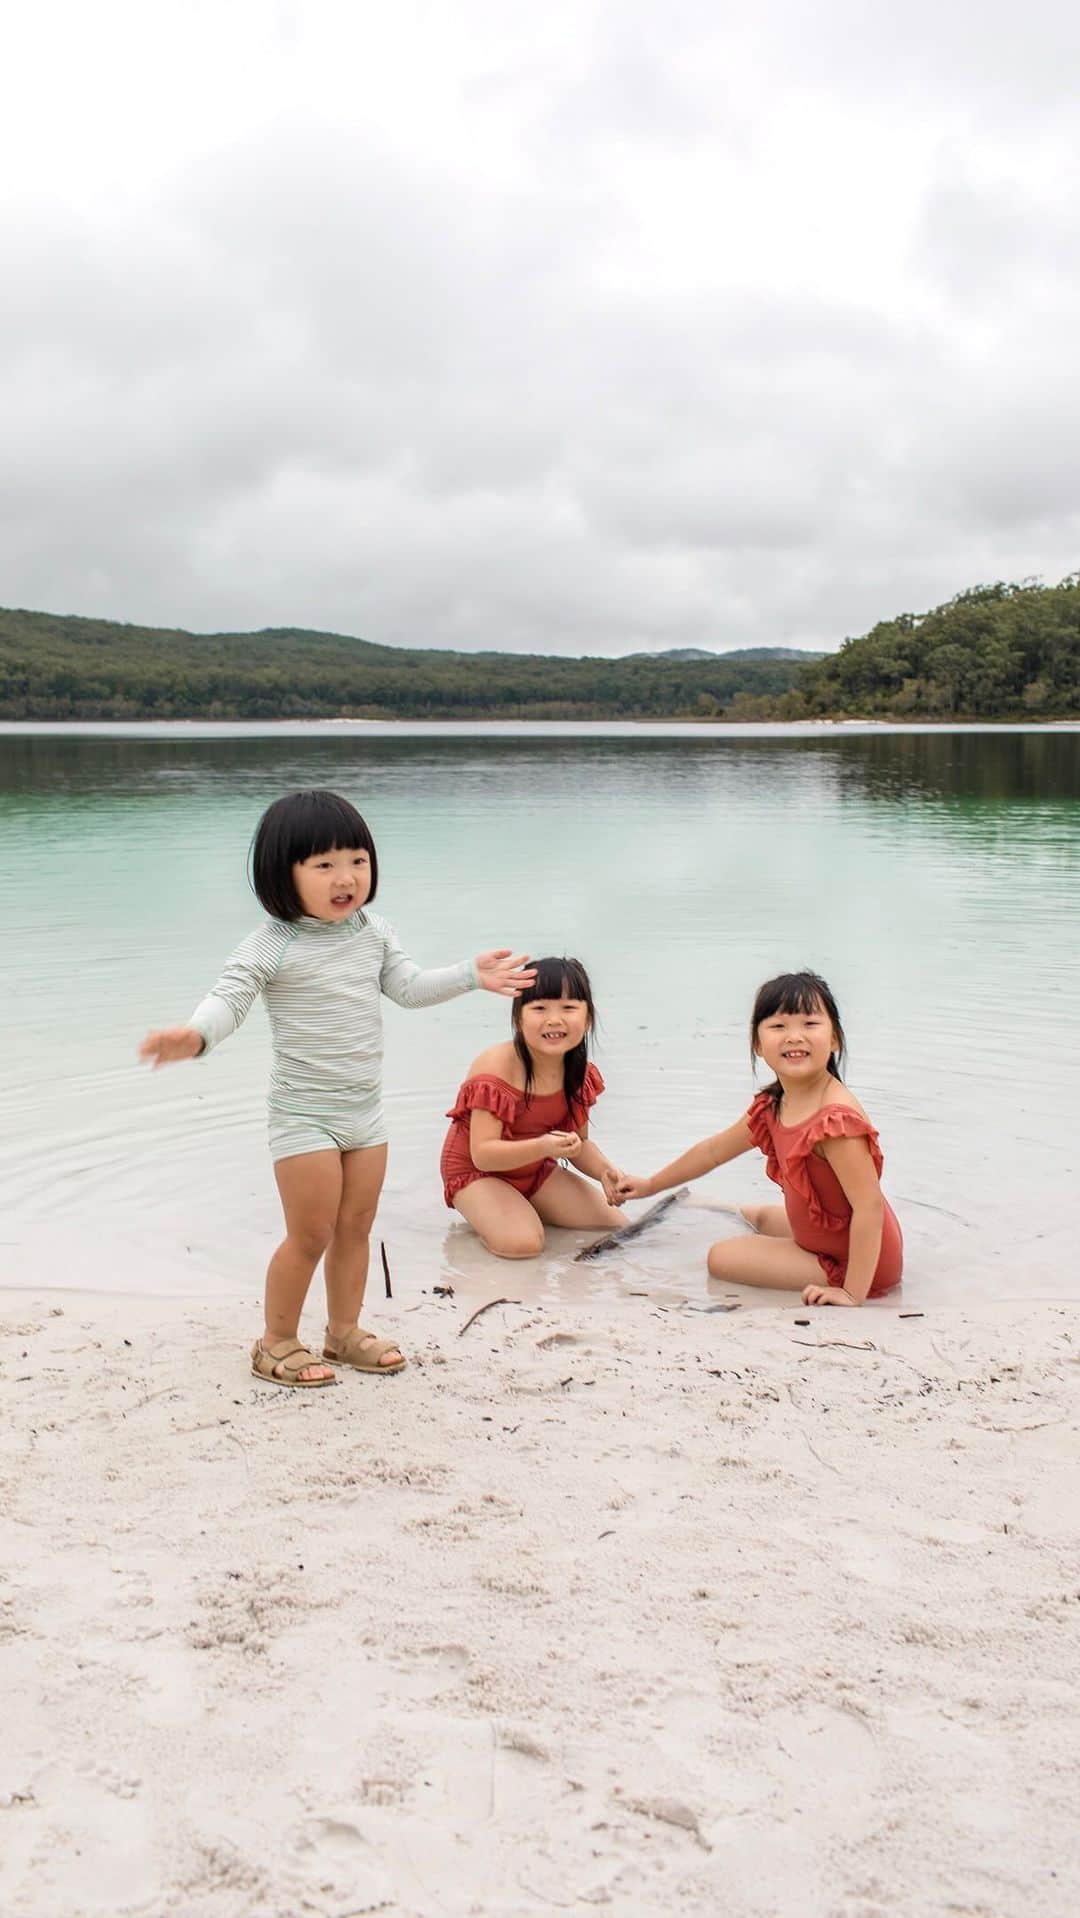 MOMOツインズのインスタグラム：「Missing the beautiful weather and fresh air in Queensland right about now. The kids vividly remember all the fun they had last June, from our glamping stay in Habitat Noosa to tubing down Eli creek on Fraser island. The 10D9N trip itinerary planning was left in the expertise of @euholidays which made it such a hassle-free holiday. There is just so much to experience! Check our link in bio for the full itinerary.   @euholidays @queensland #thisisqueensland」